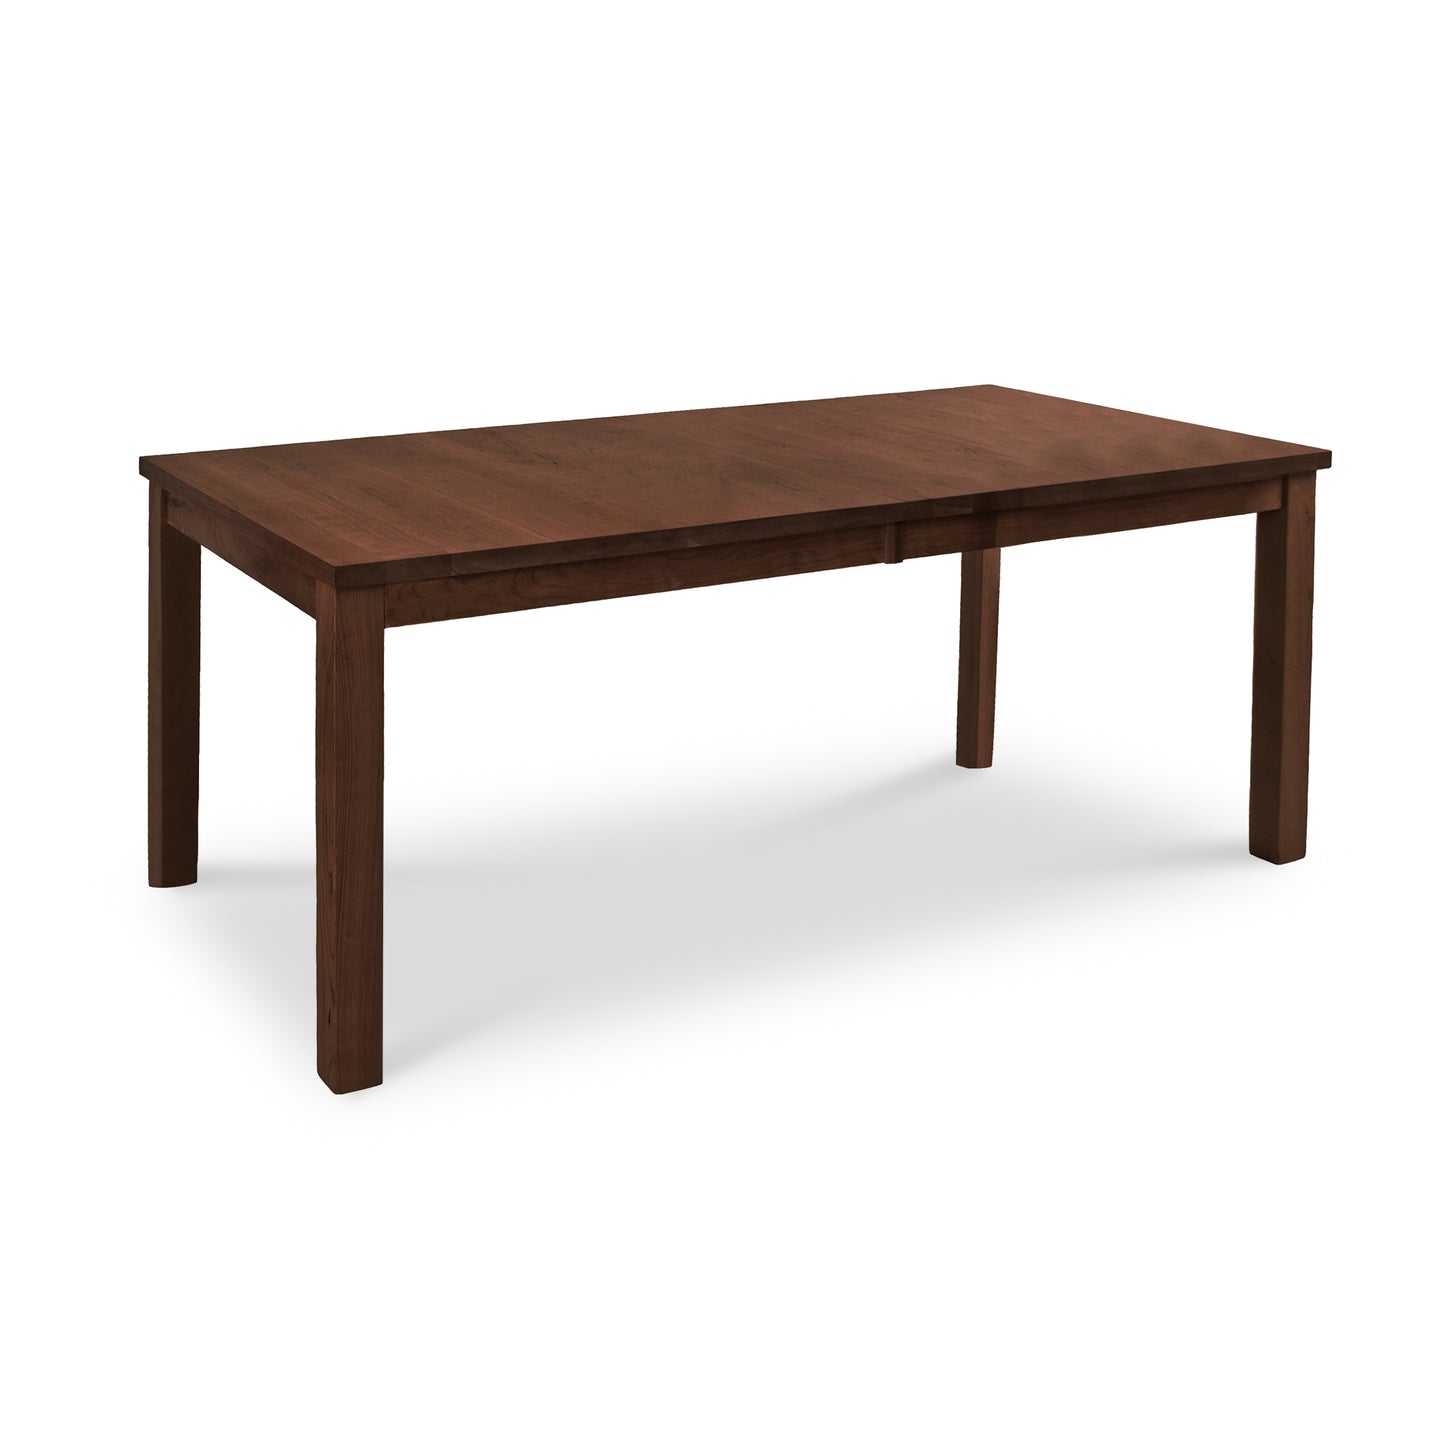 A sustainably harvested wooden table, the Lyndon Furniture Modern Mission Parsons Extension Table is an eco-friendly choice for any dining room.